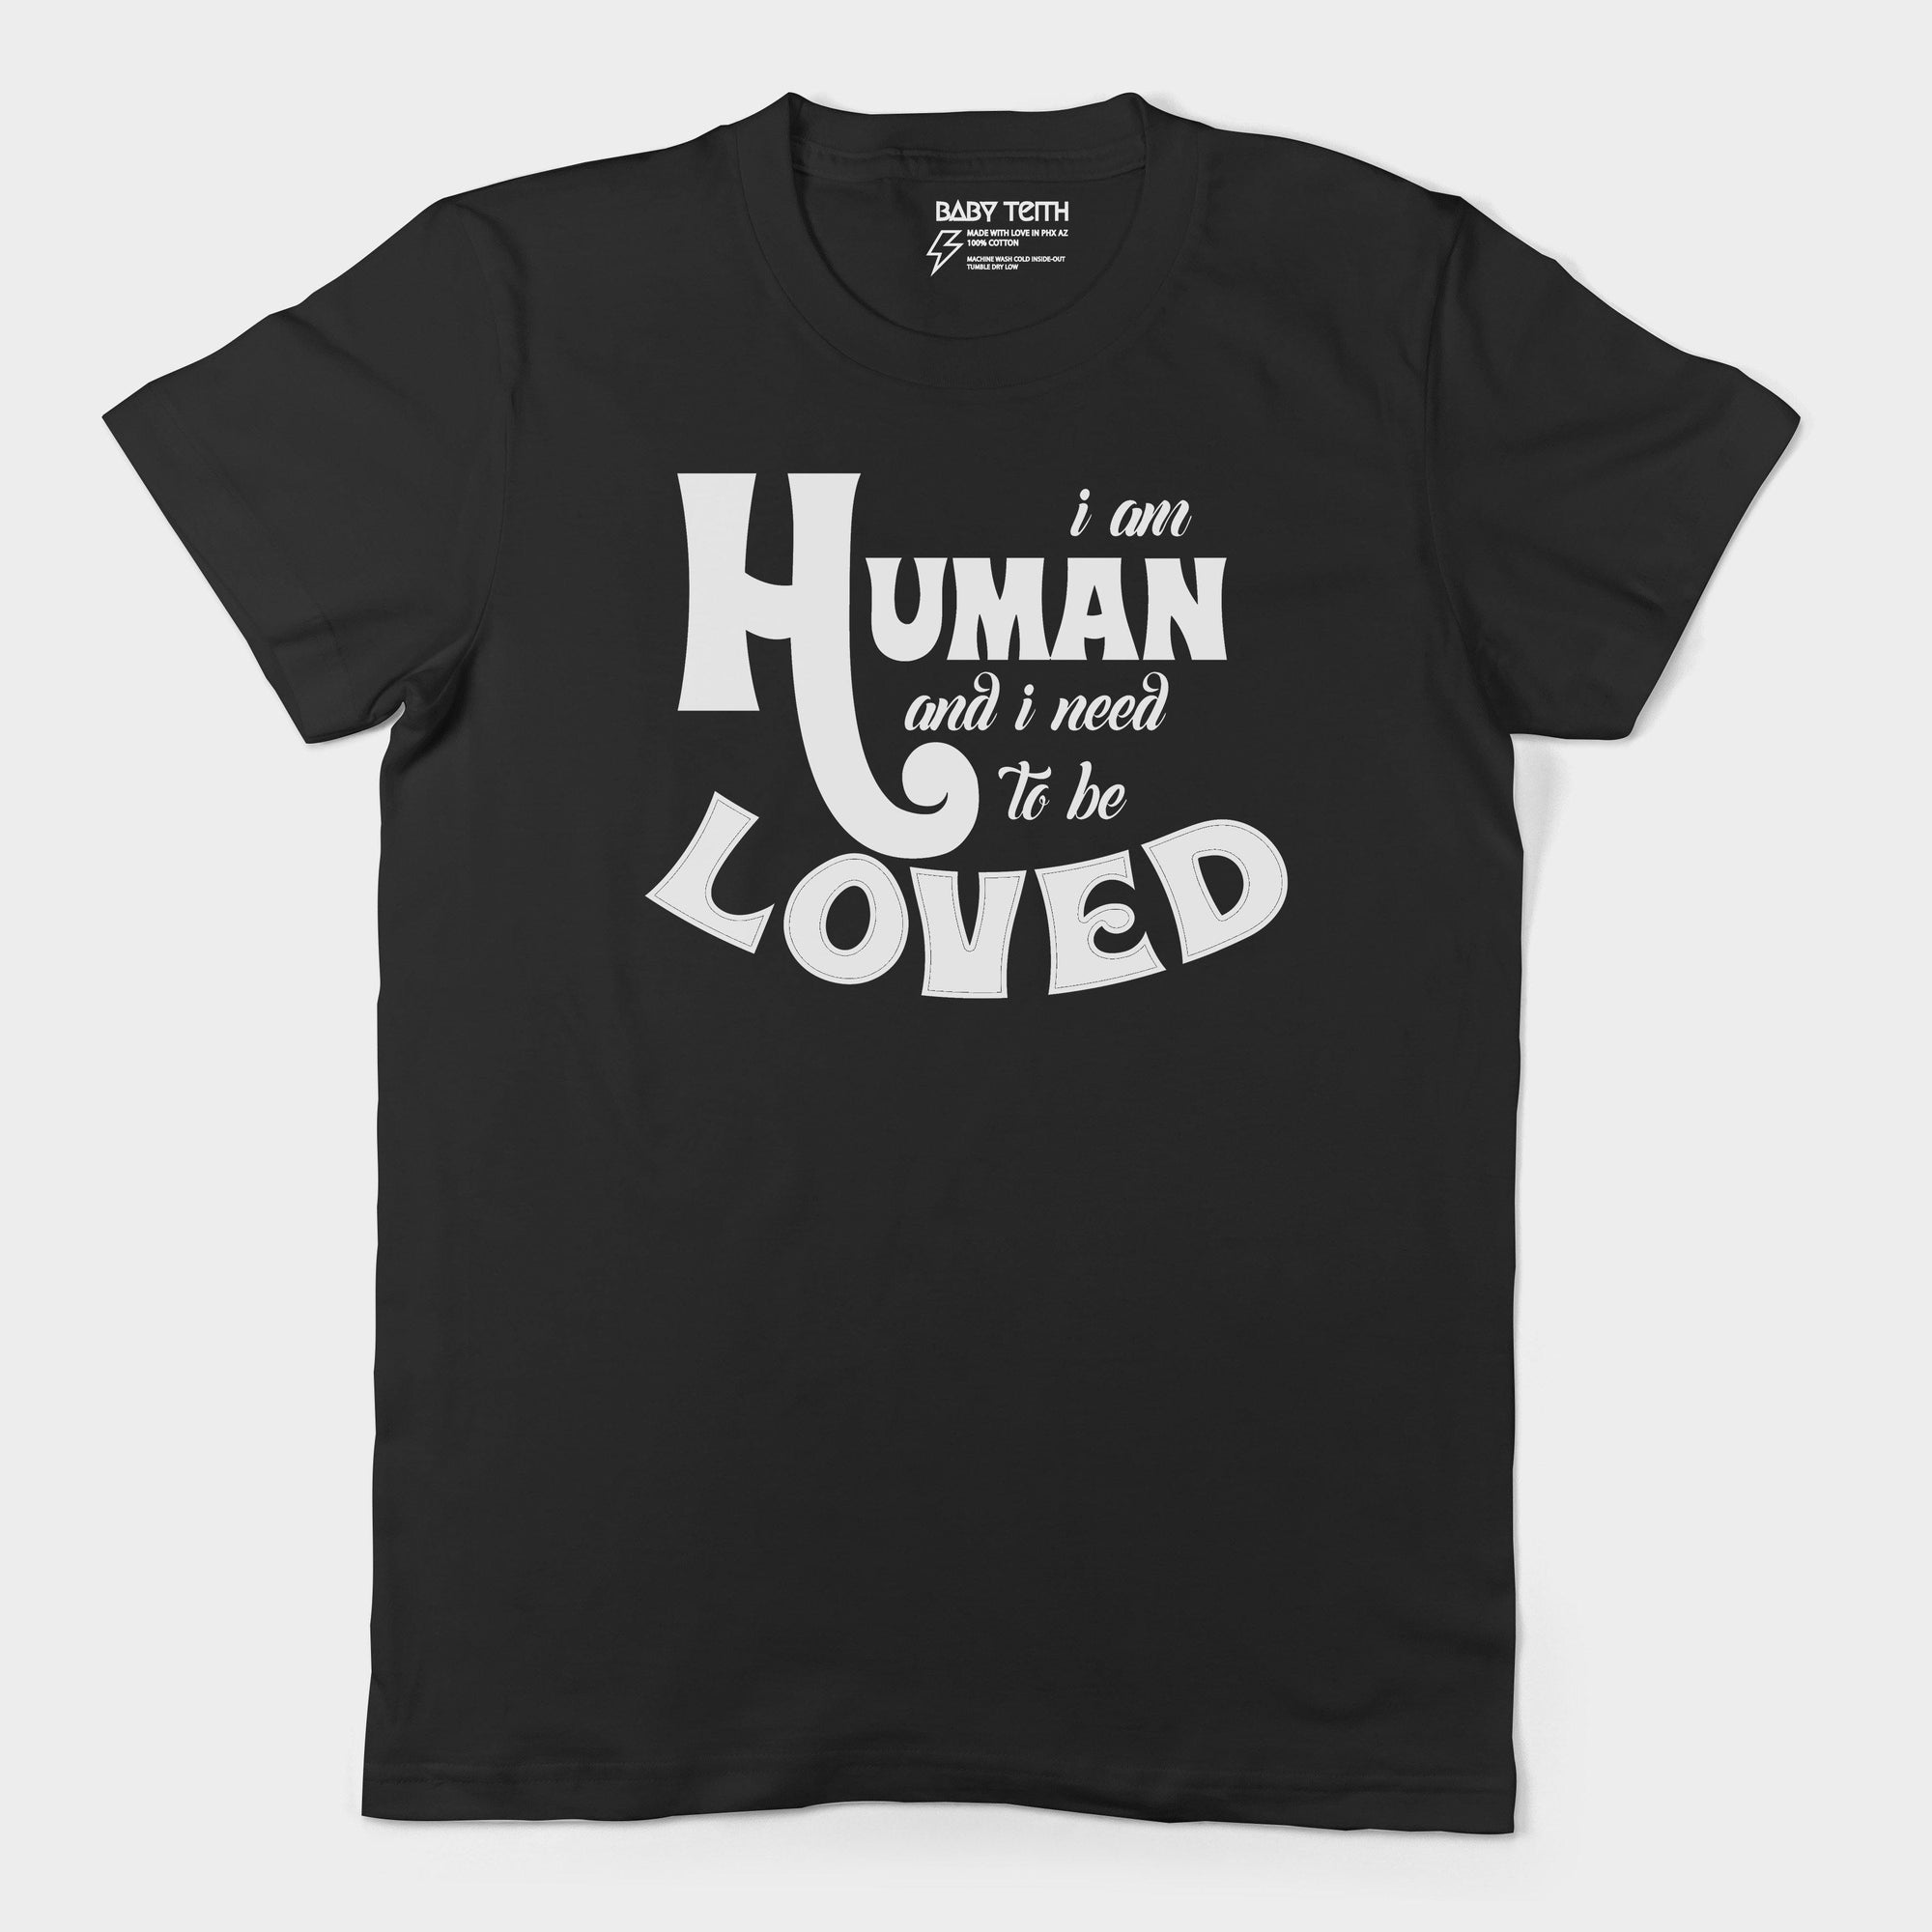 &quot;I am Human&quot; Adult&#39;s Unisex Tee (5 Colors) - Baby Teith